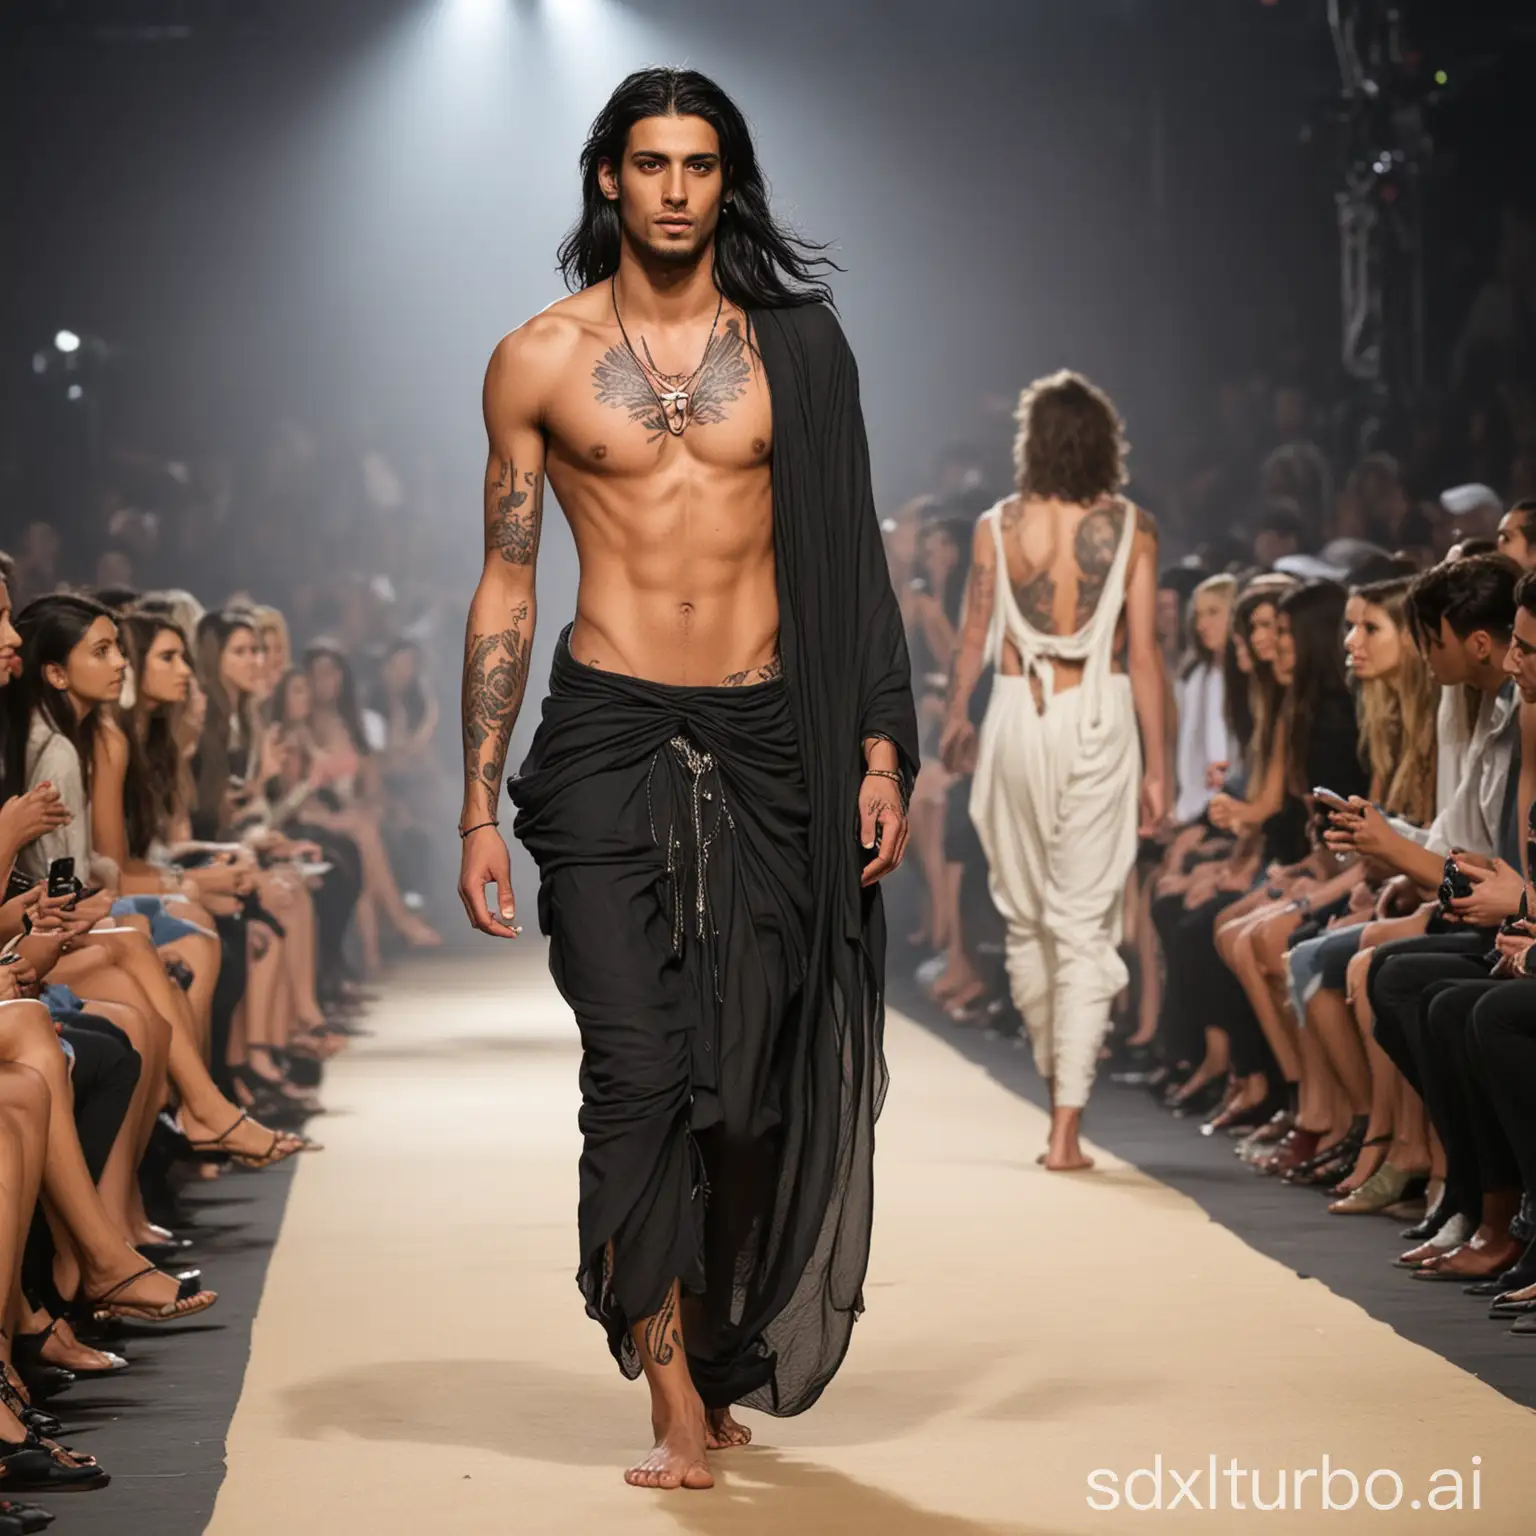 tall slim sexy young arabic male model with long flowing black hair and tattoos wearing a small loincloth walking barefoot down the runway in a fashion show with other models